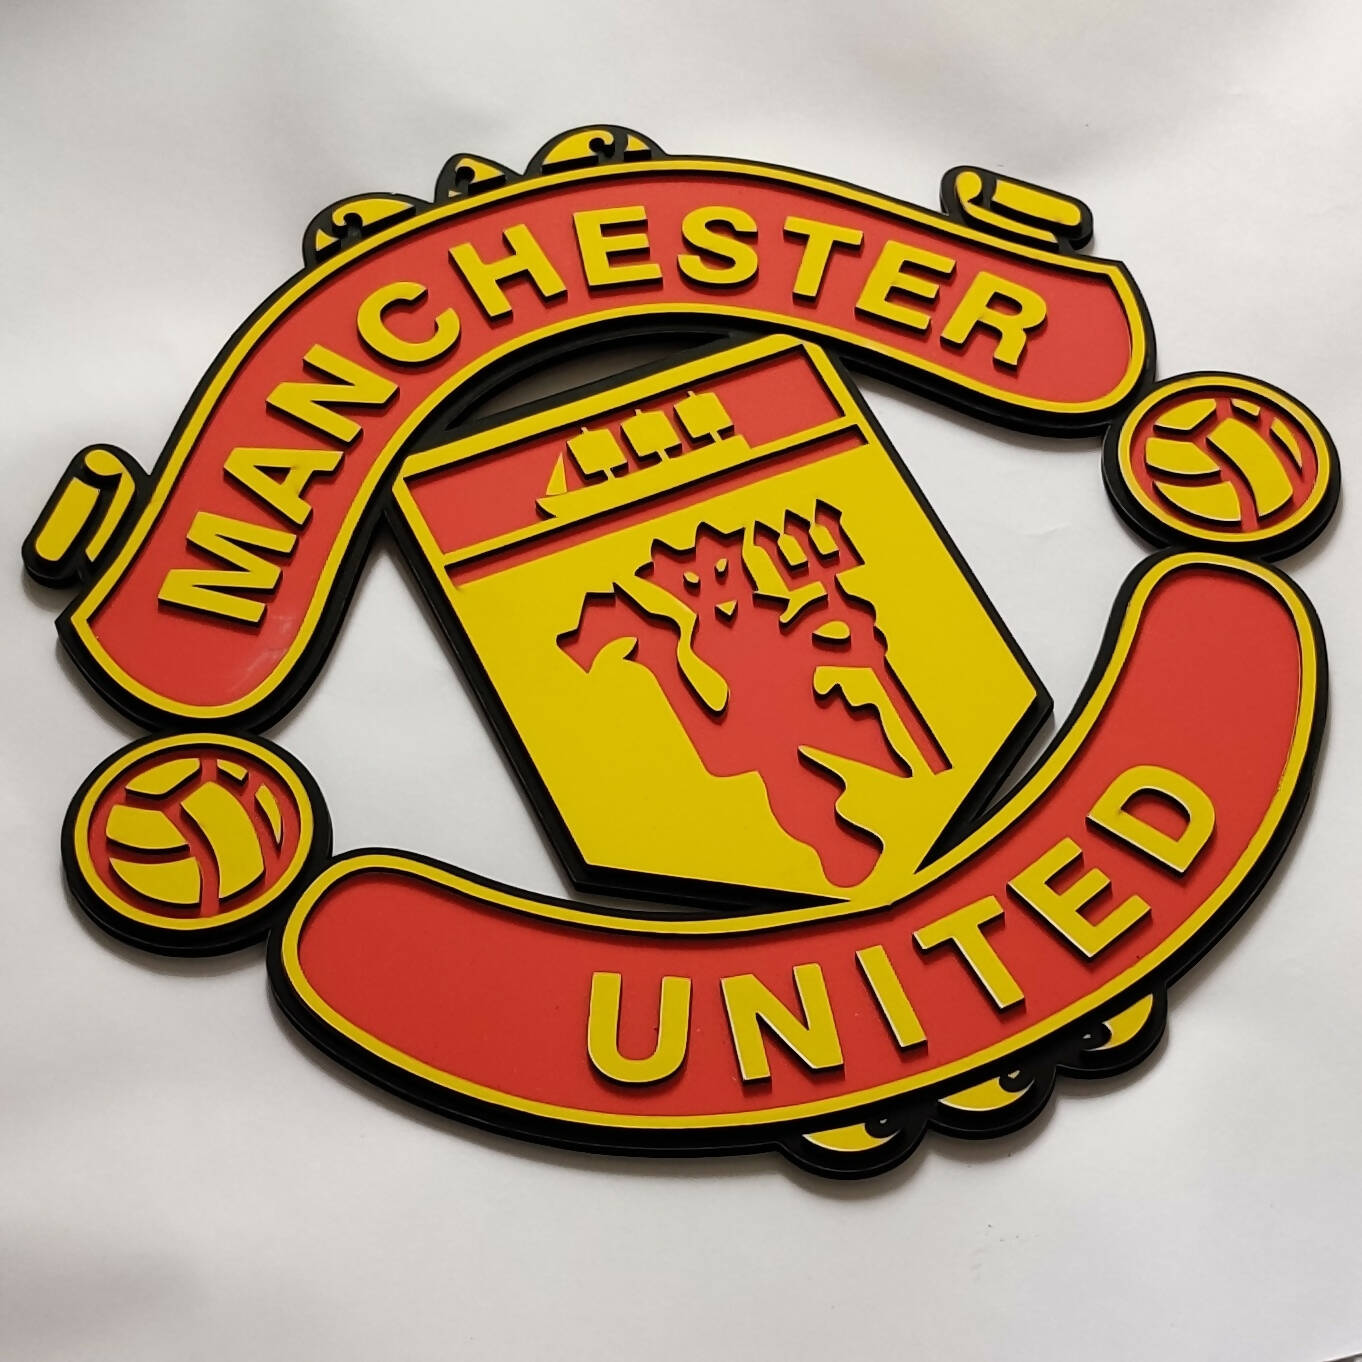 Manchester united wall art 15 inches yellow and red